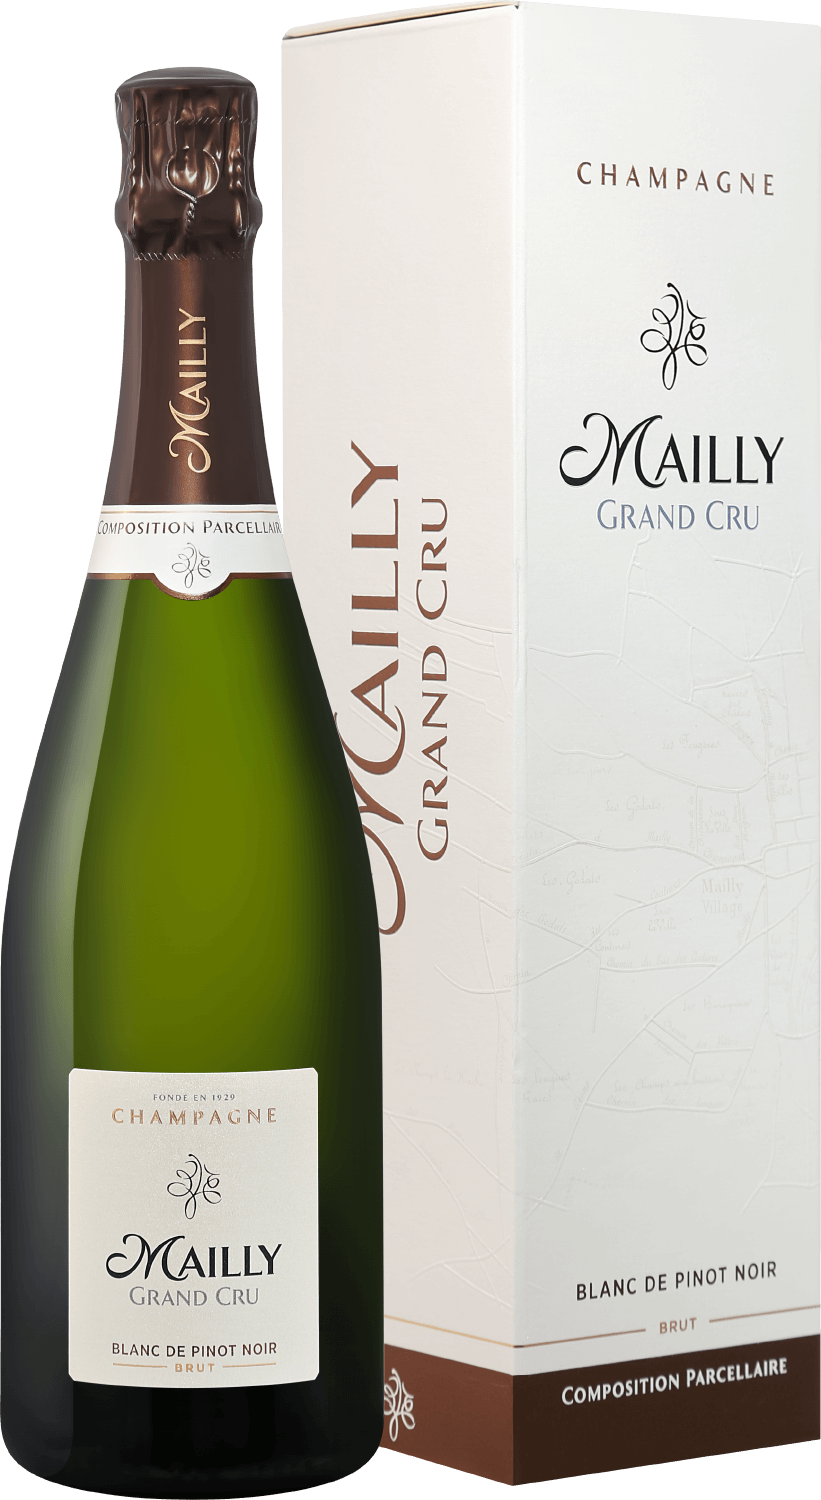 Mailly Grand Cru Brut Blanc de Pinot Noir Champagne АОС (gift box) mailly grand cru les échansons brut millesime champagne aoc gift box